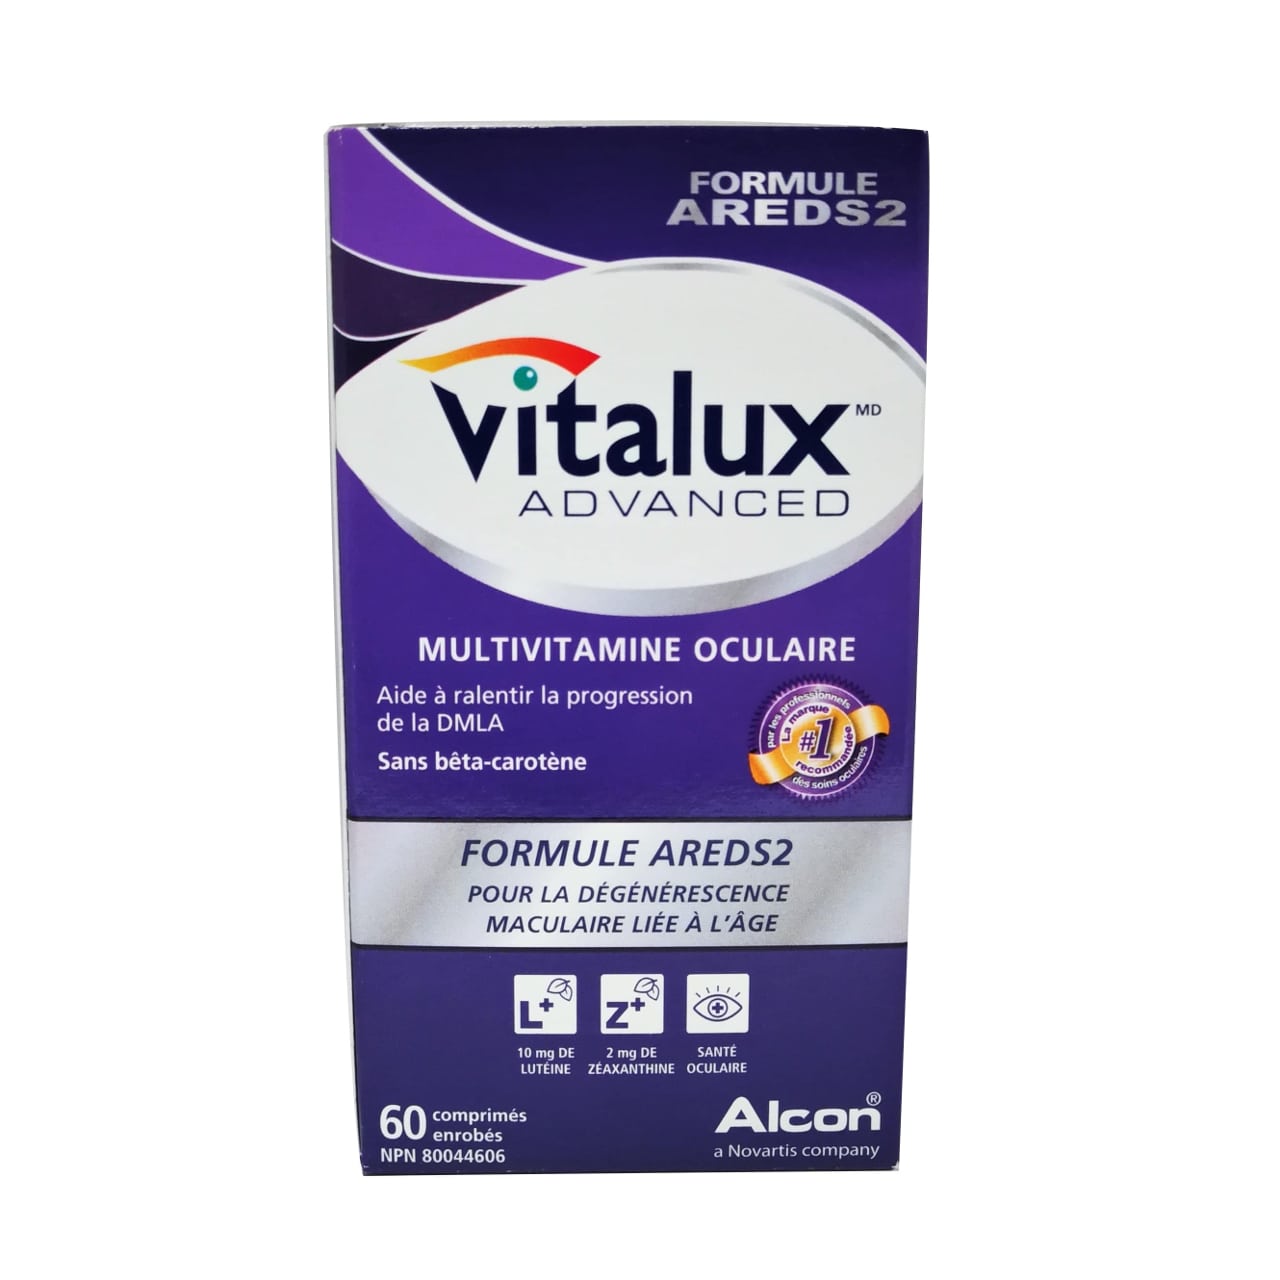 French product label for Alcon Vitalux Advanced AREDS2 Formula